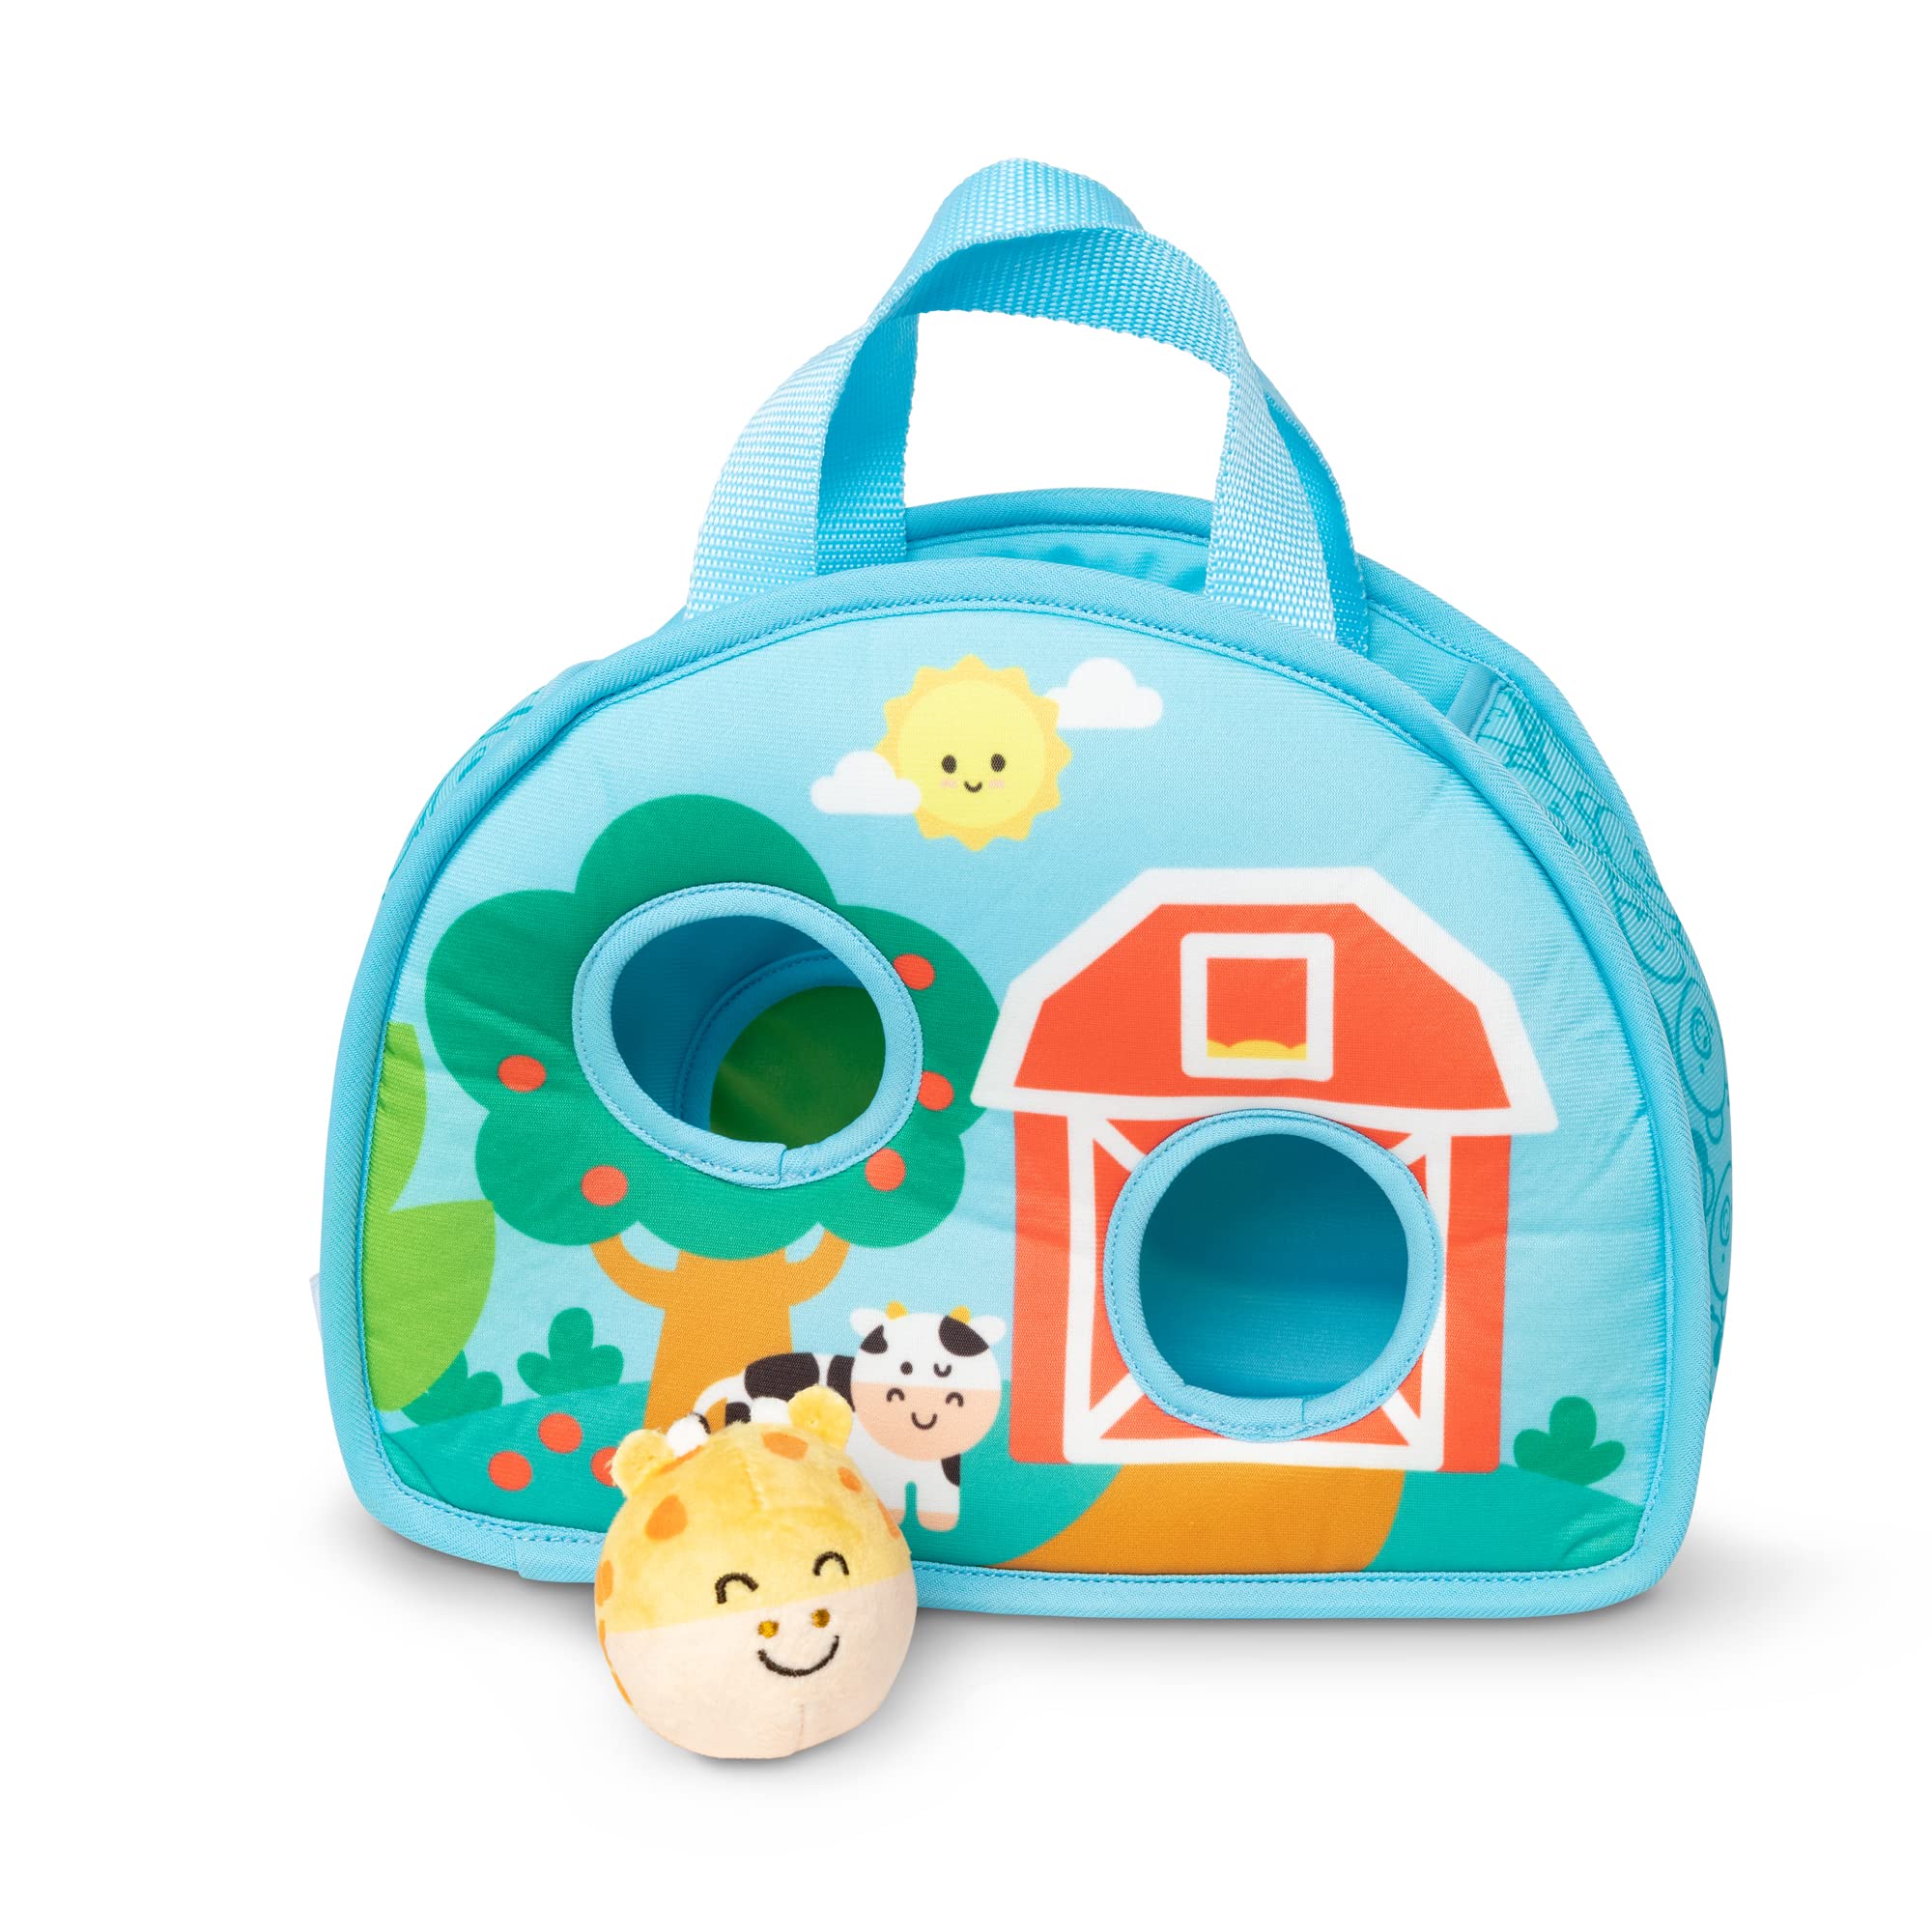 Melissa & Doug Rollables Take-Along Tote w/ Giraffe $12.55 + Free Shipping w/ Prime or on $25+